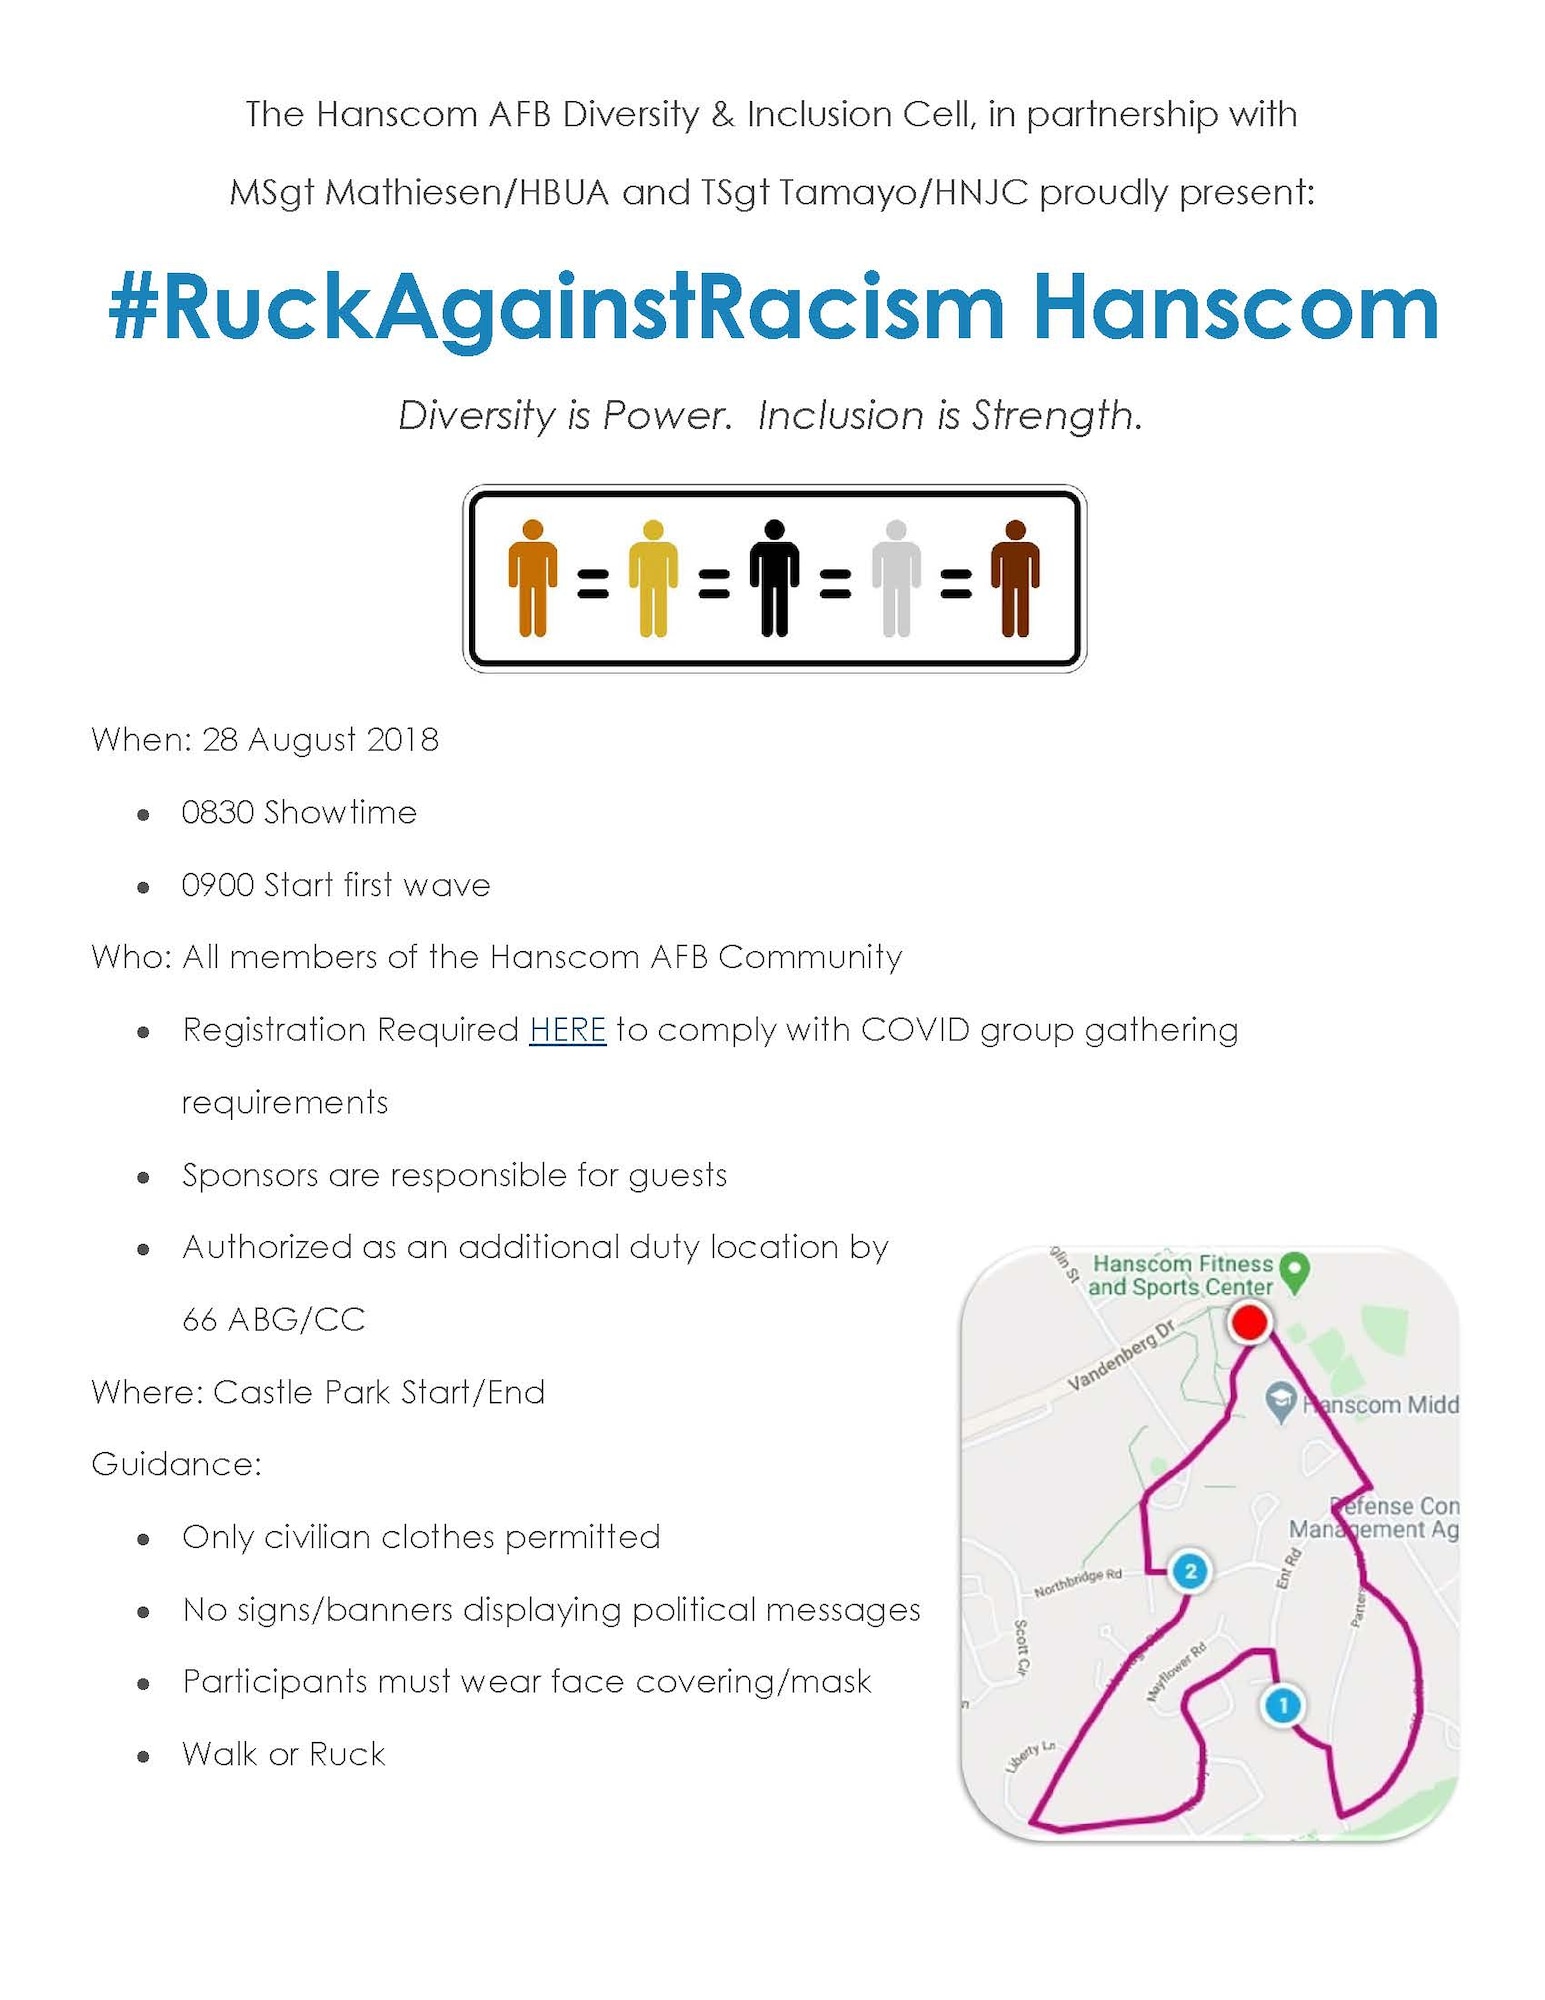 Members from the Hanscom Diversity and Inclusion cell are hosting a 2.5 mile ‘Ruck Against Racism’ here to generate conversation on inclusiveness throughout the installation. (Courtesy Graphic)